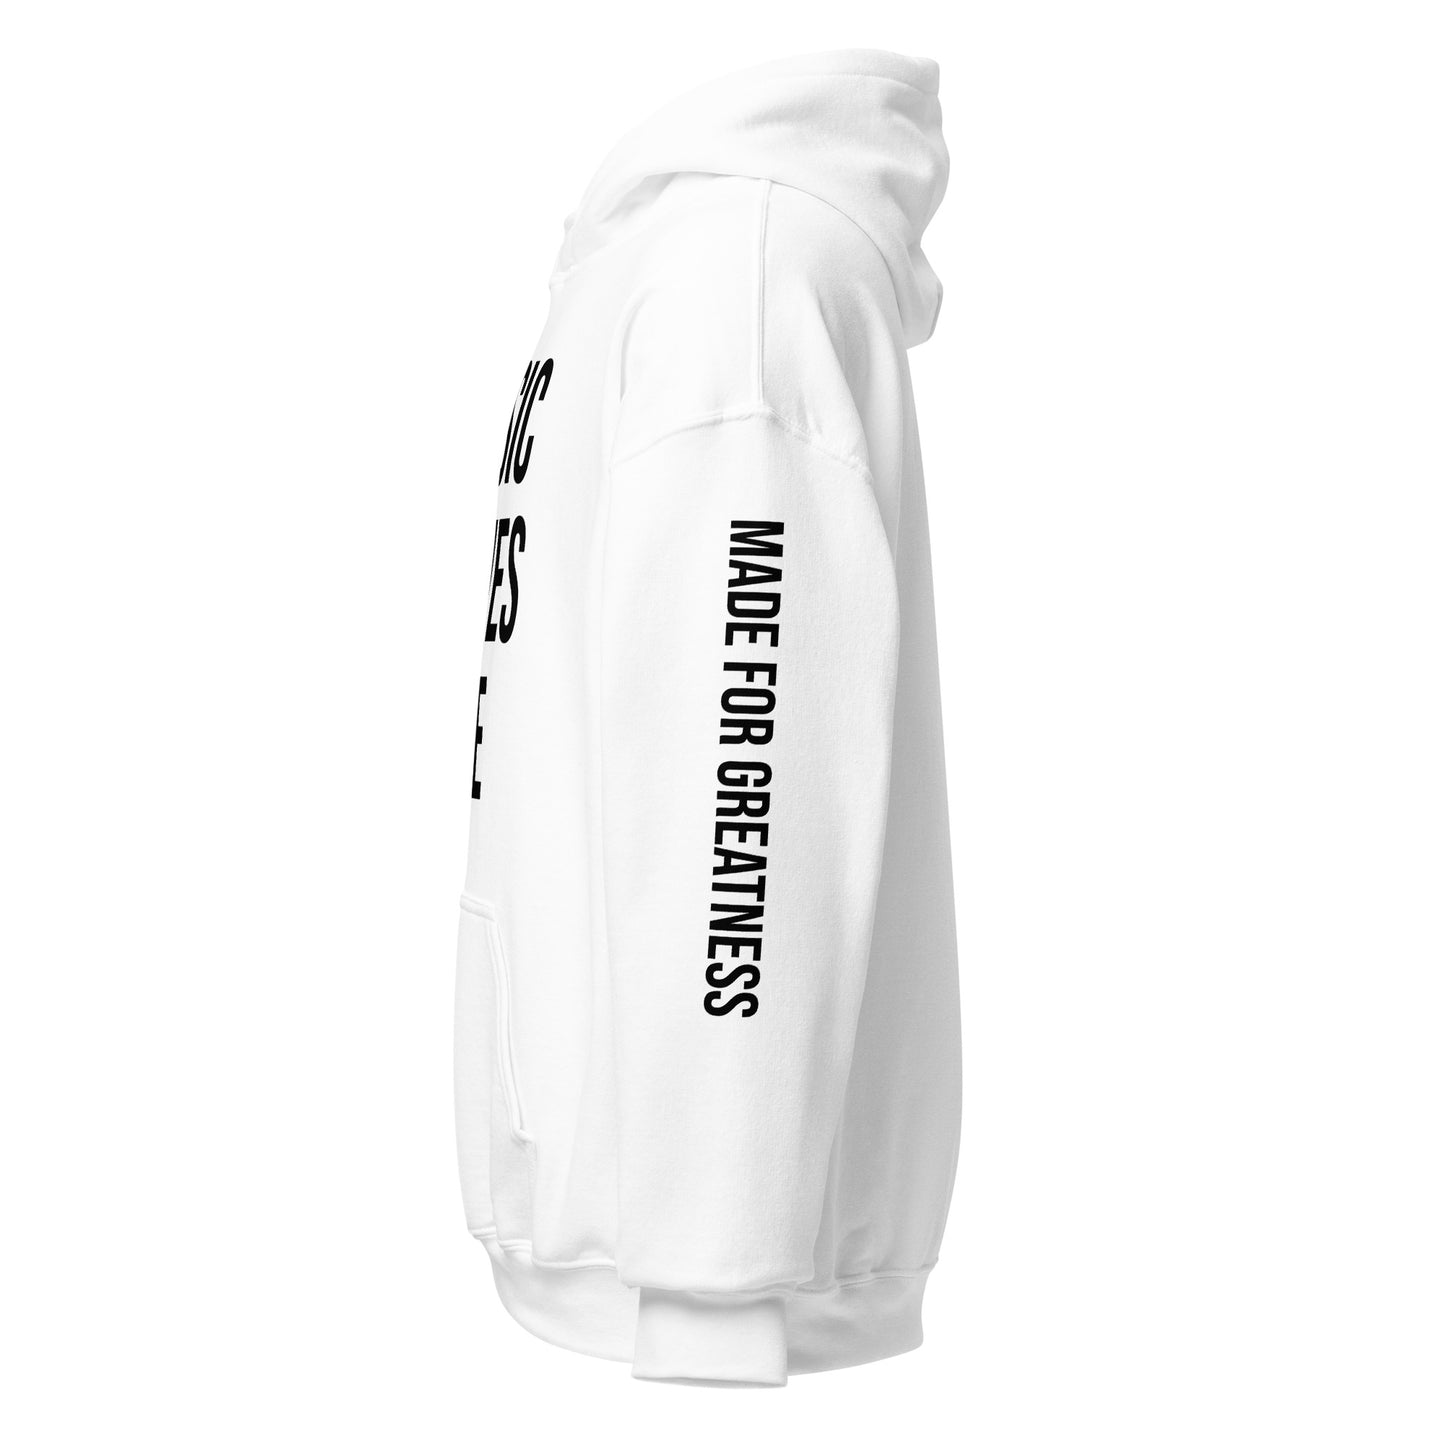 MUSIC MOVES ME BL Hoodie